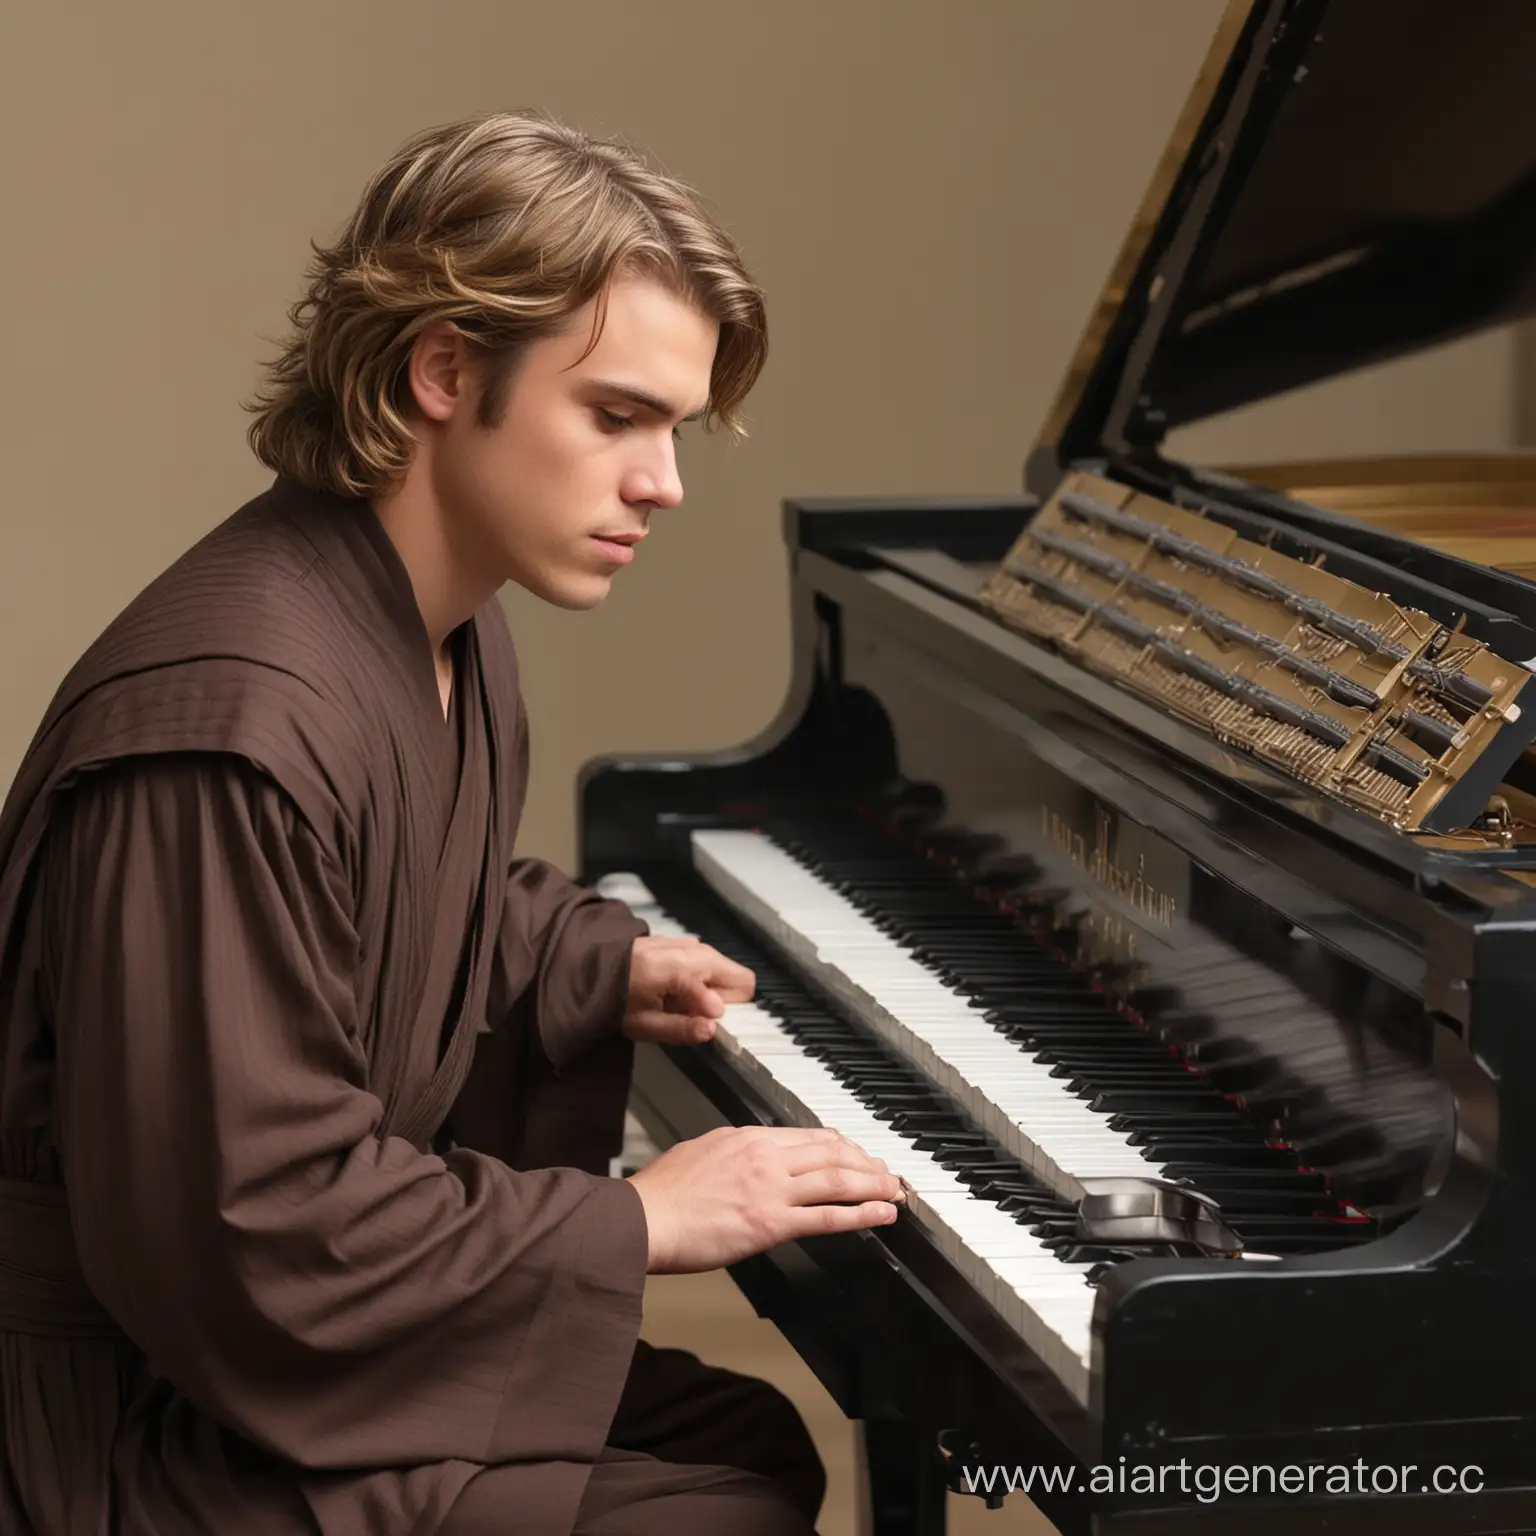 Anakin skywalker plays the piano